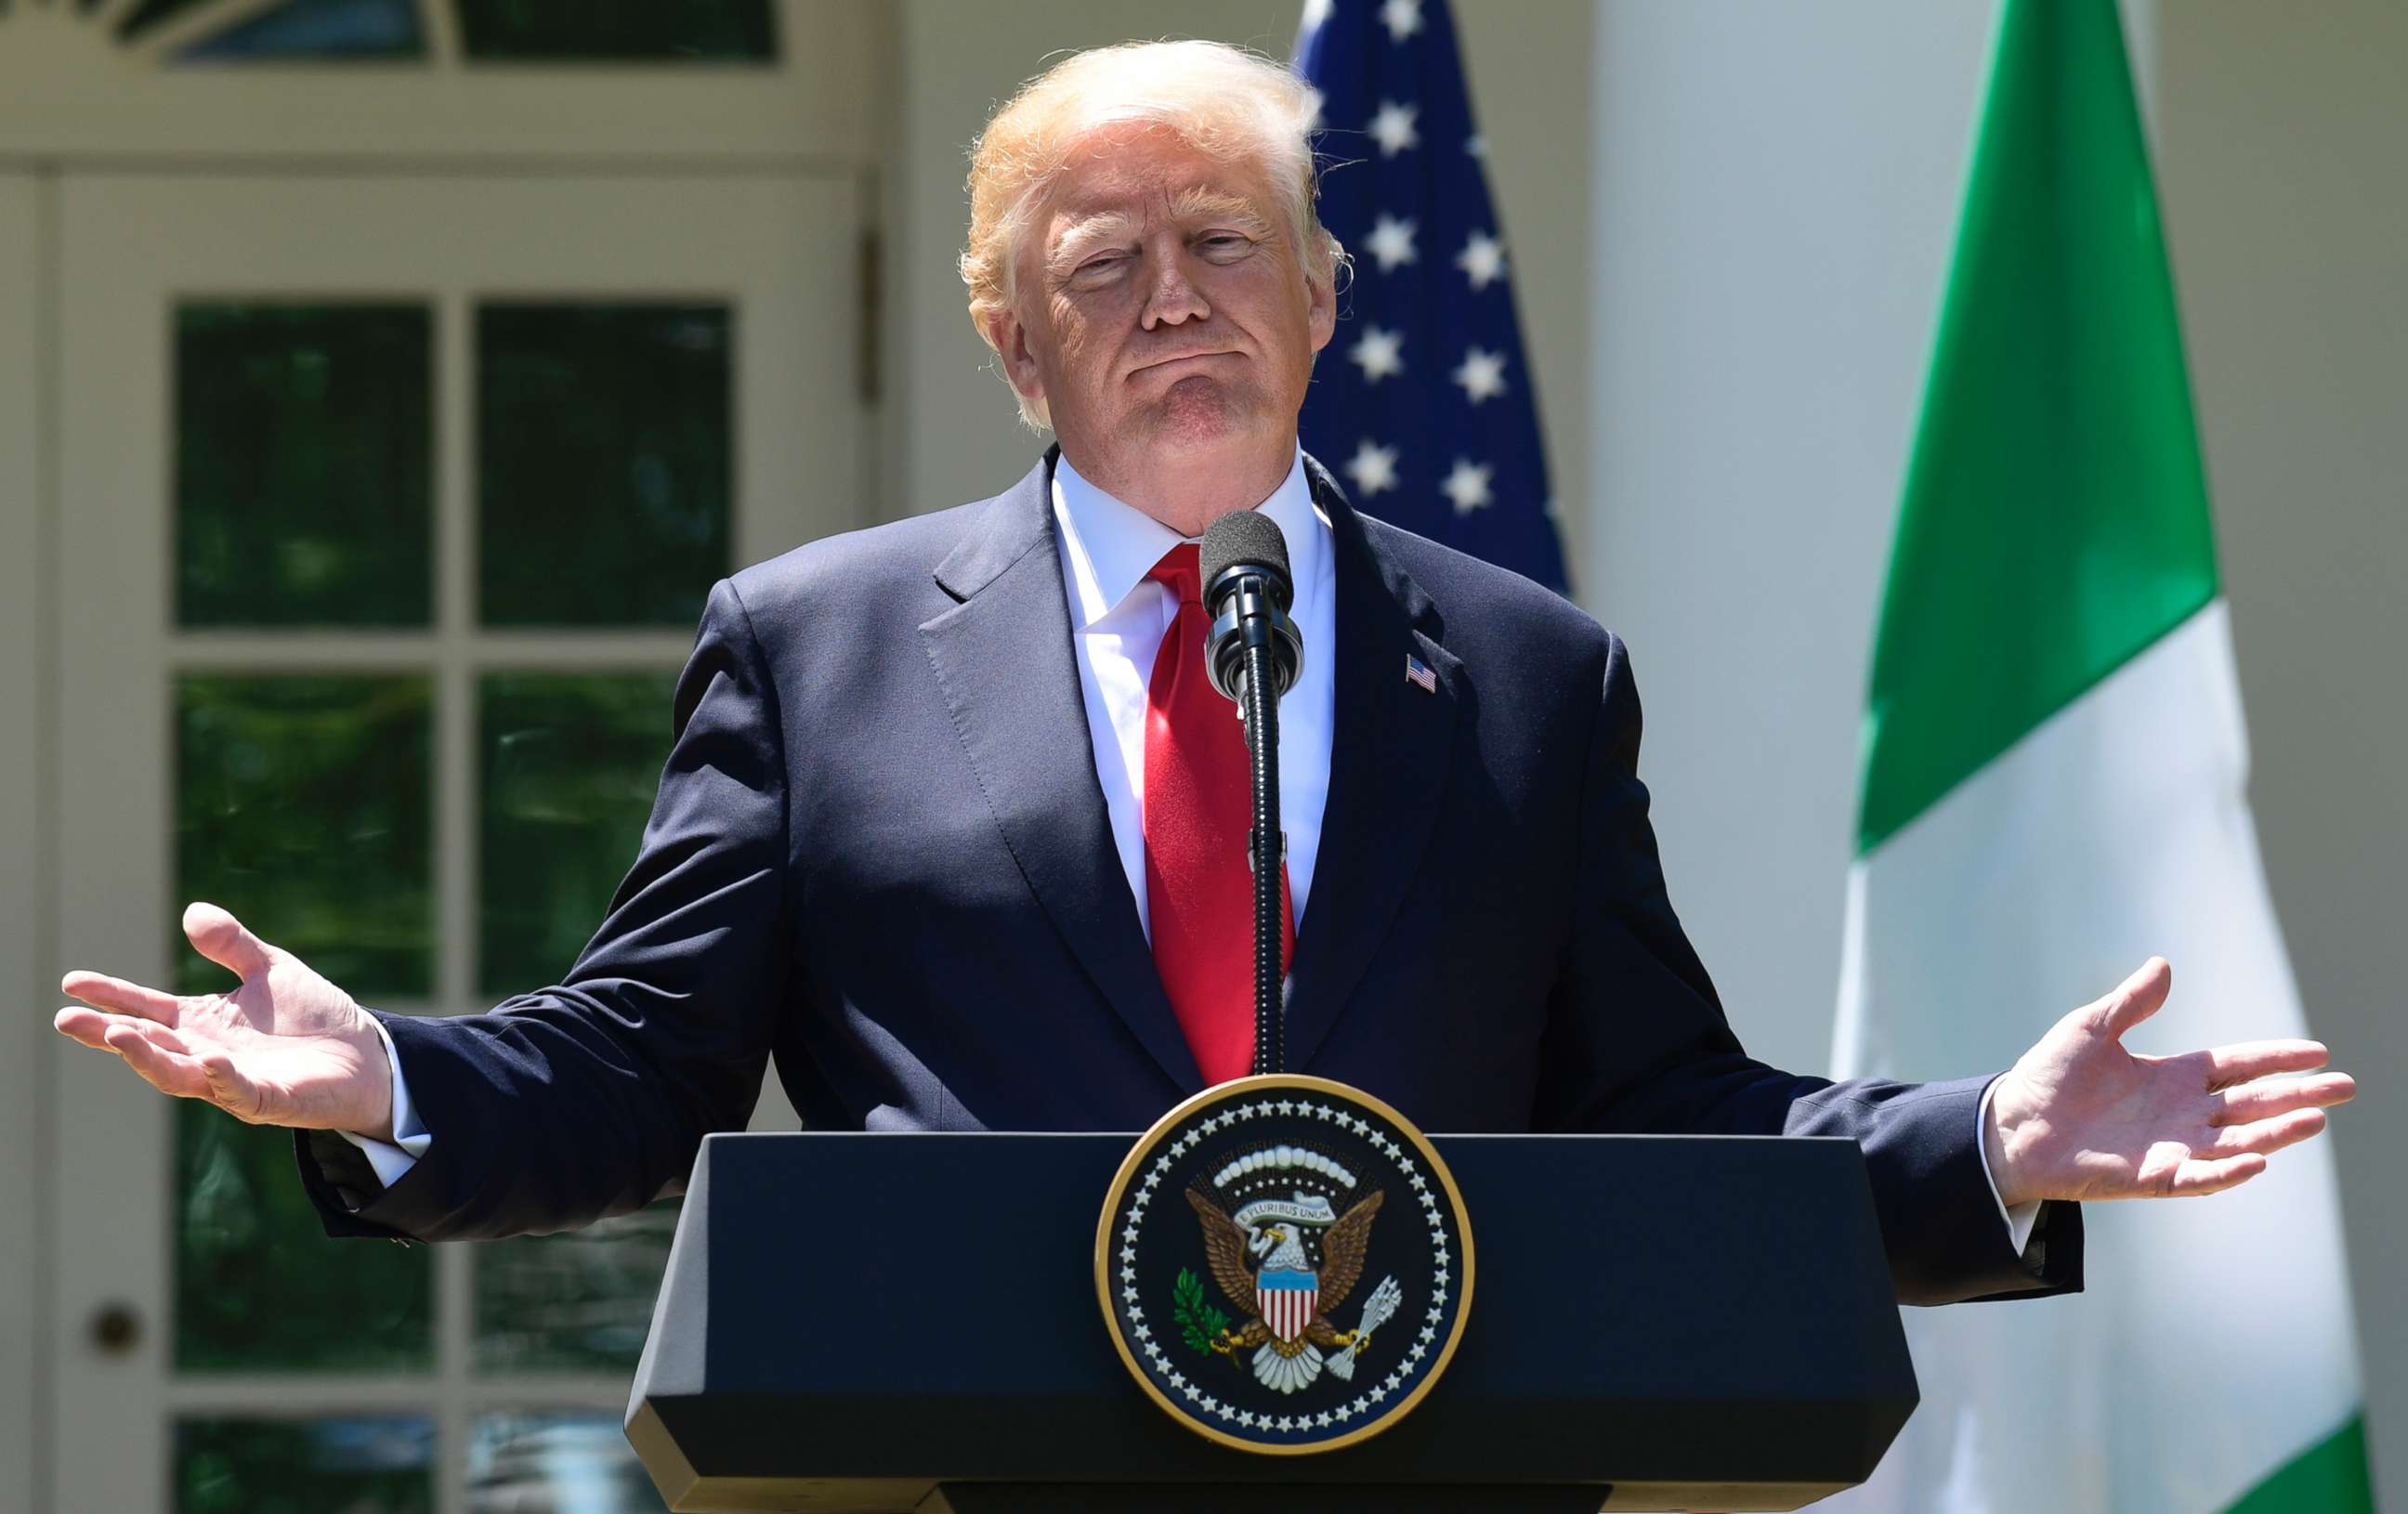 PHOTO: President Donald Trump speaks during a news conference with Nigerian President Muhammadu Buhari in the Rose Garden of the White House in Washington, D.C., April 30, 2018.